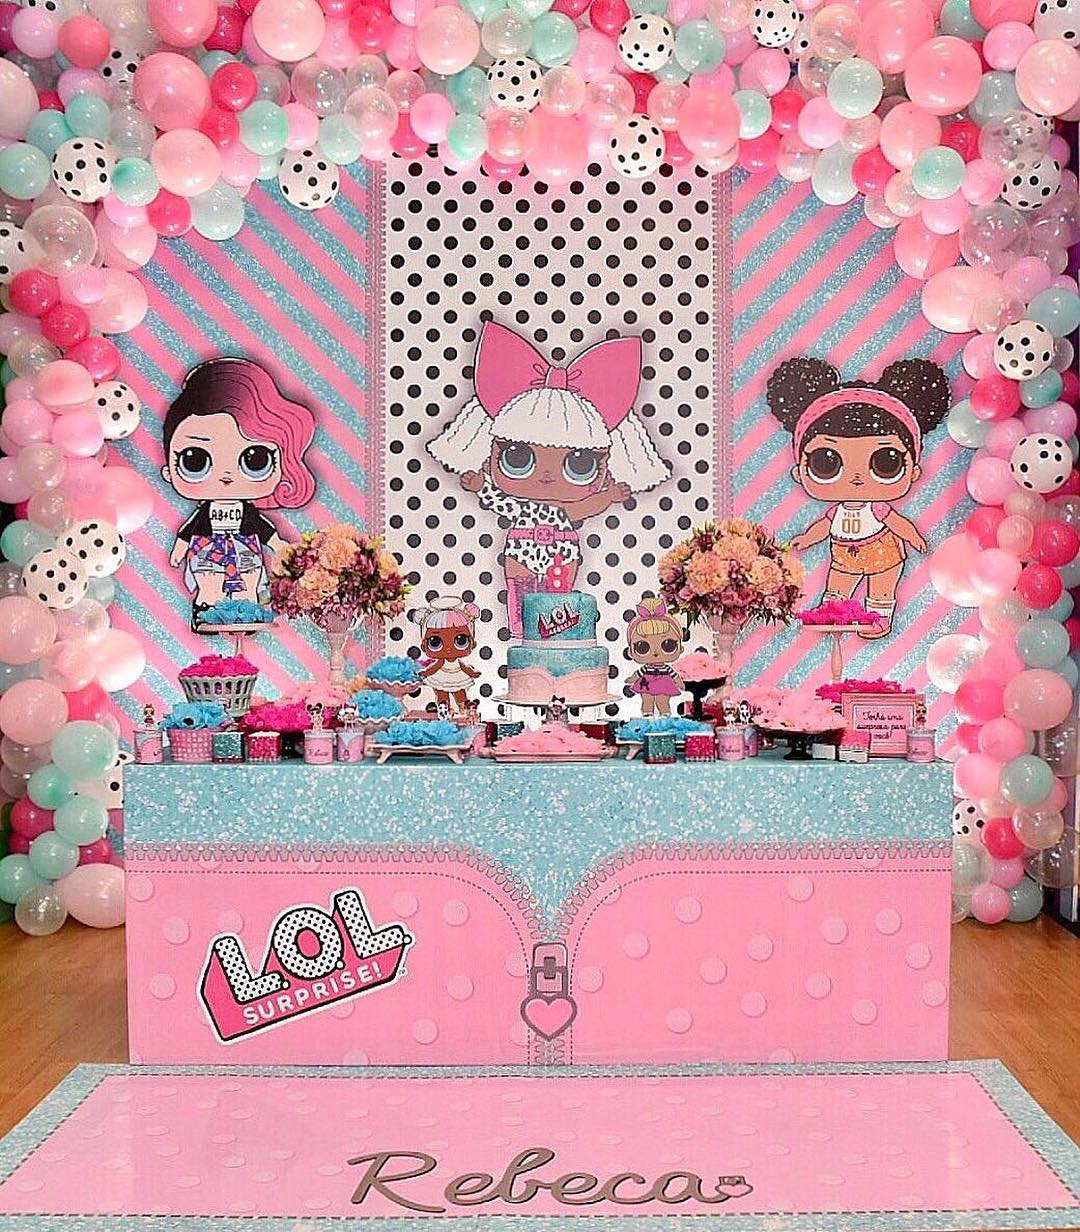 dessert table for party girl dolls theme lol (5)